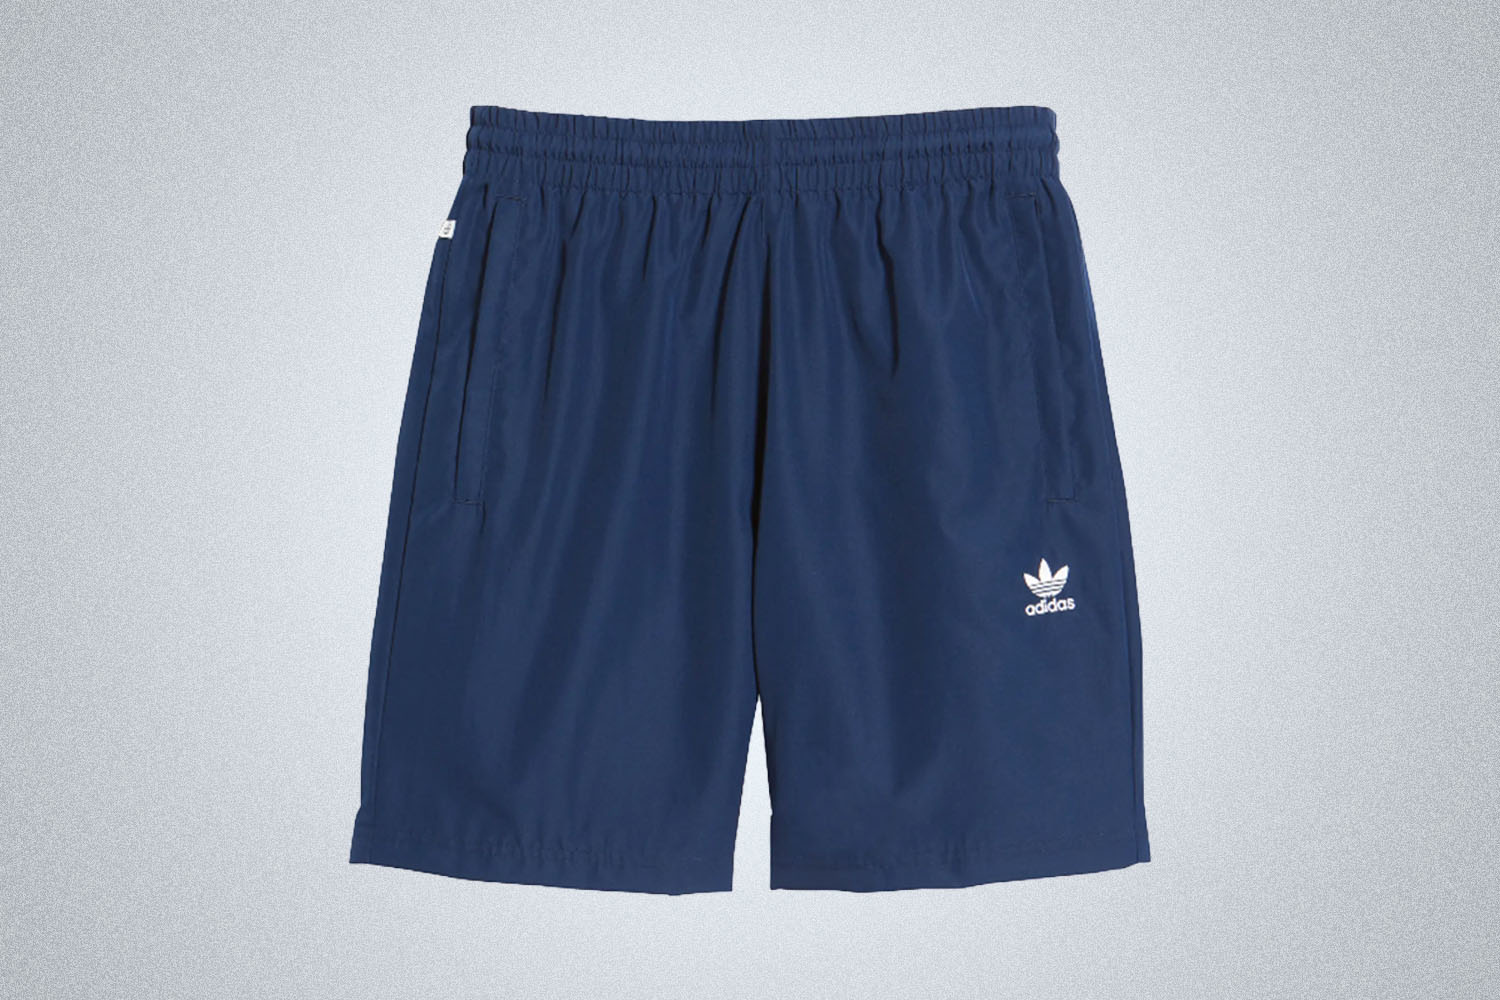 a pair of blue adidas shorts on a grey background